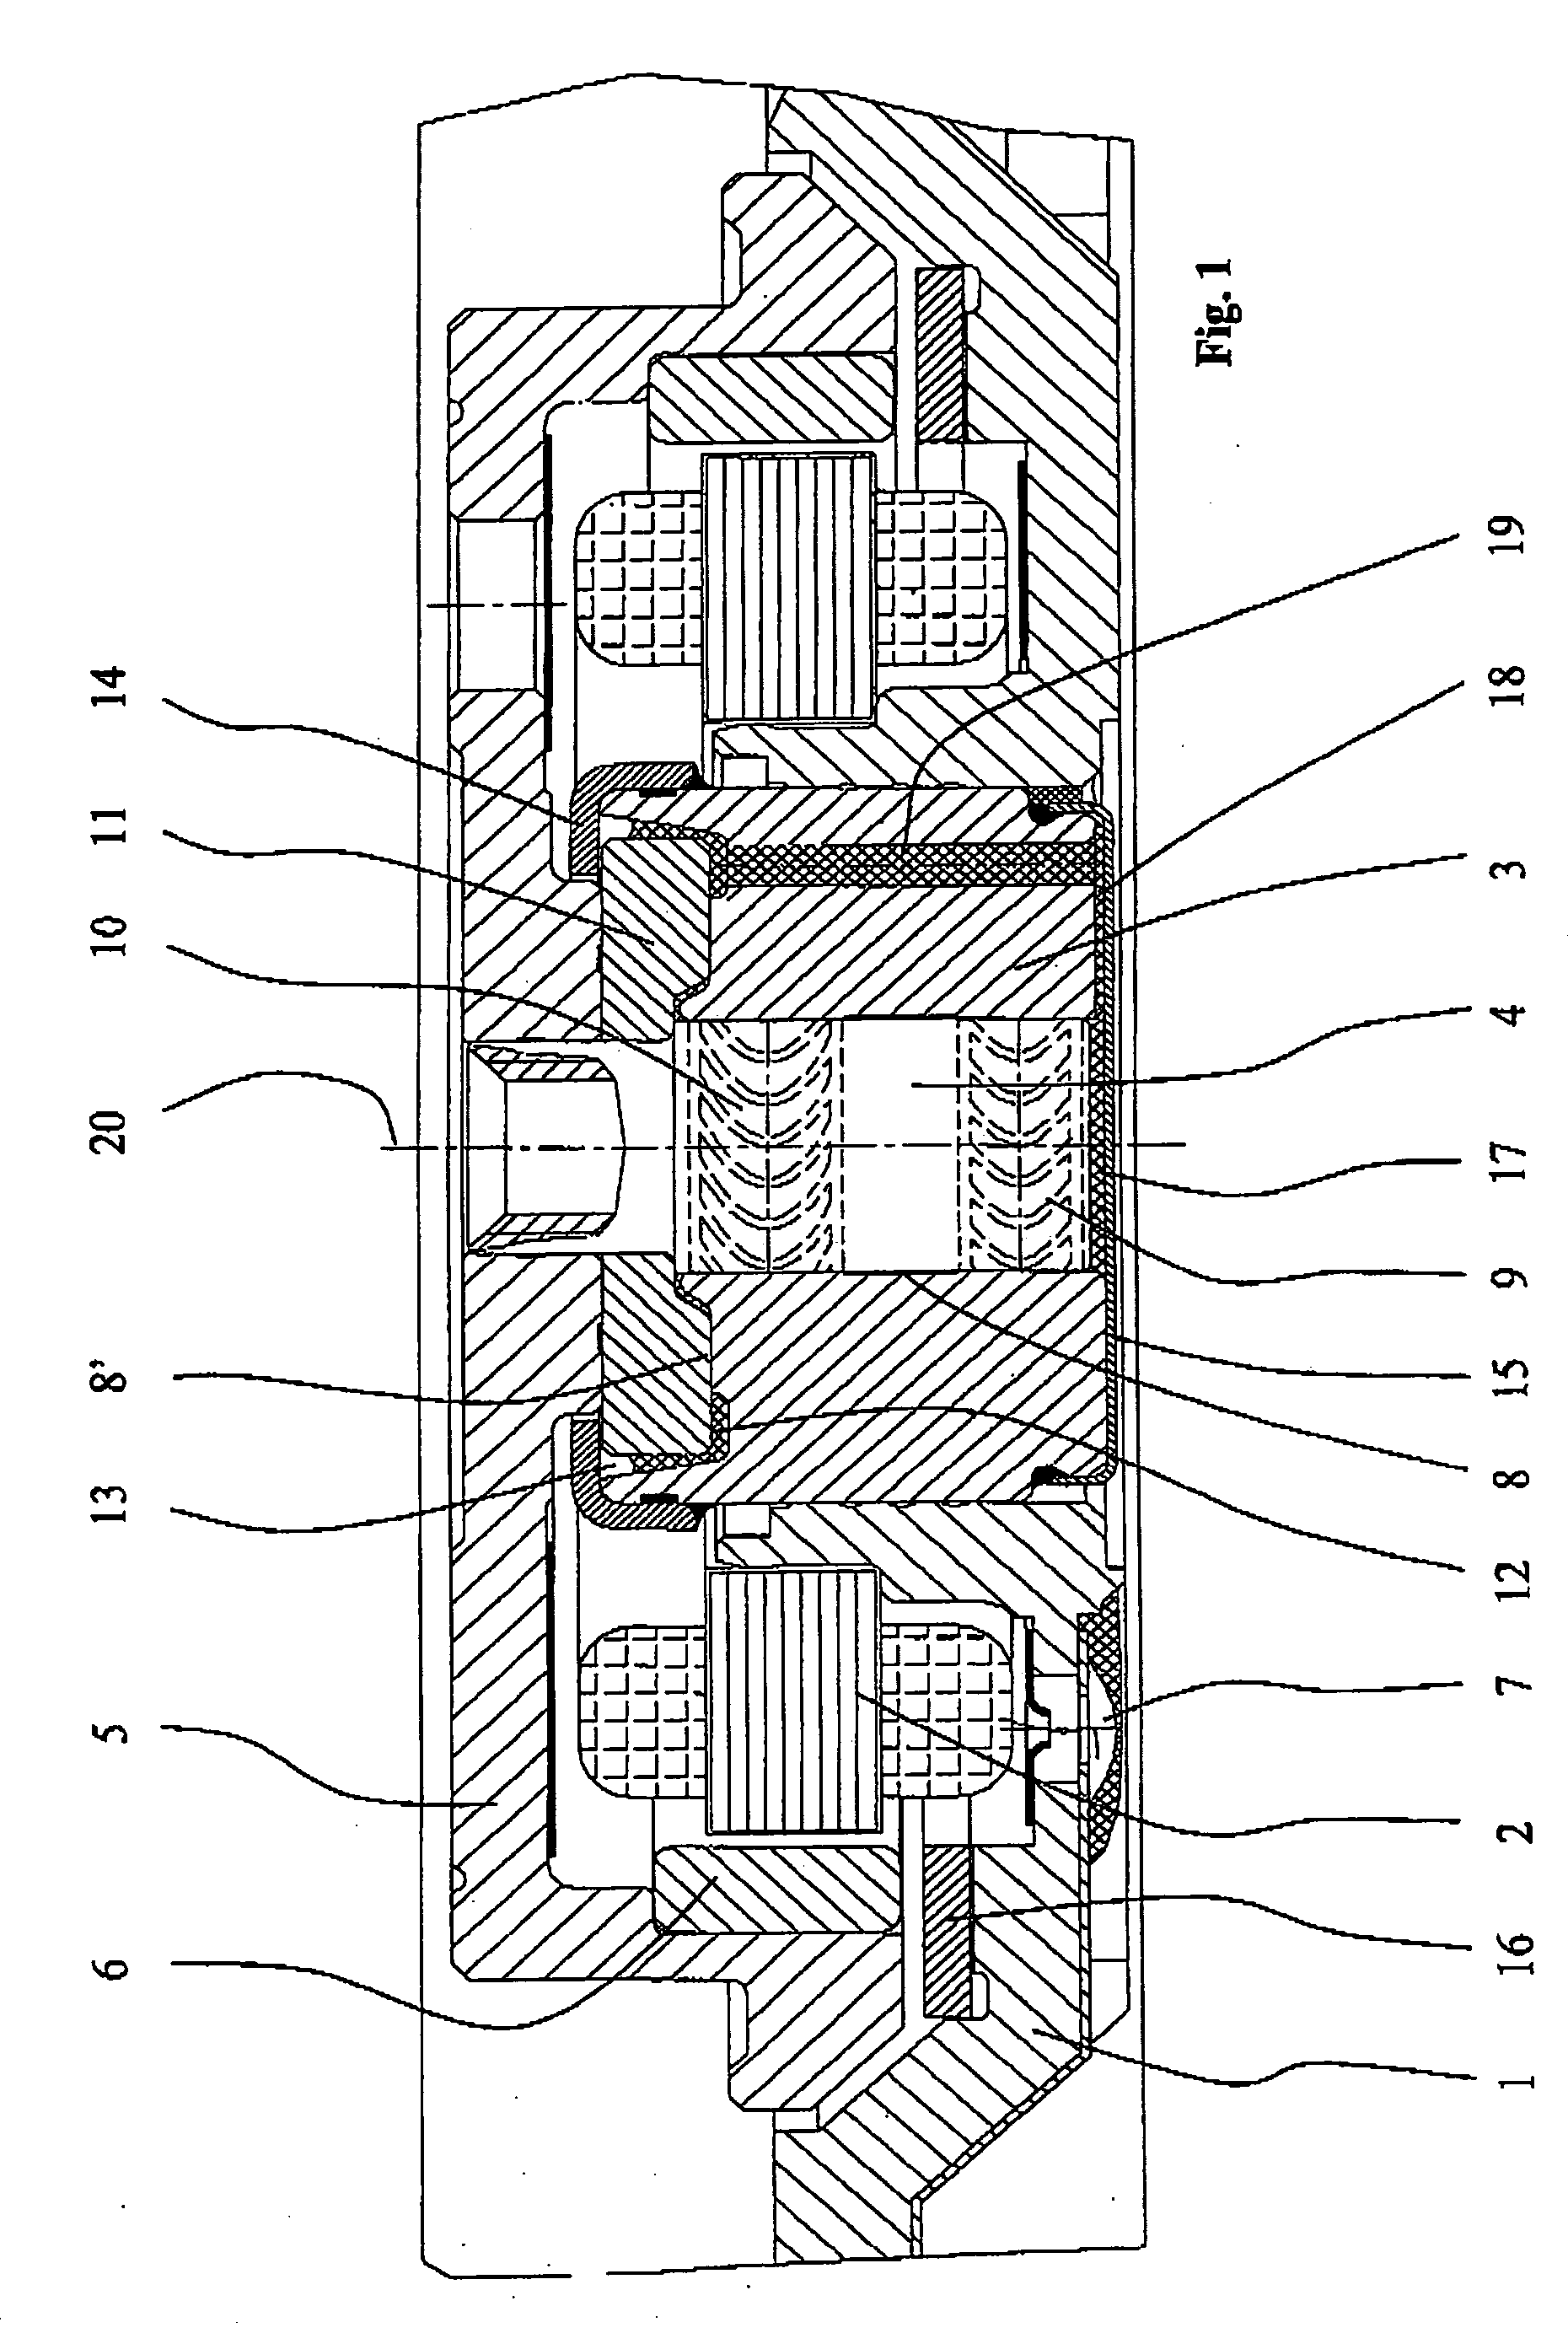 Spindle motor having a hydrodynamic bearing system